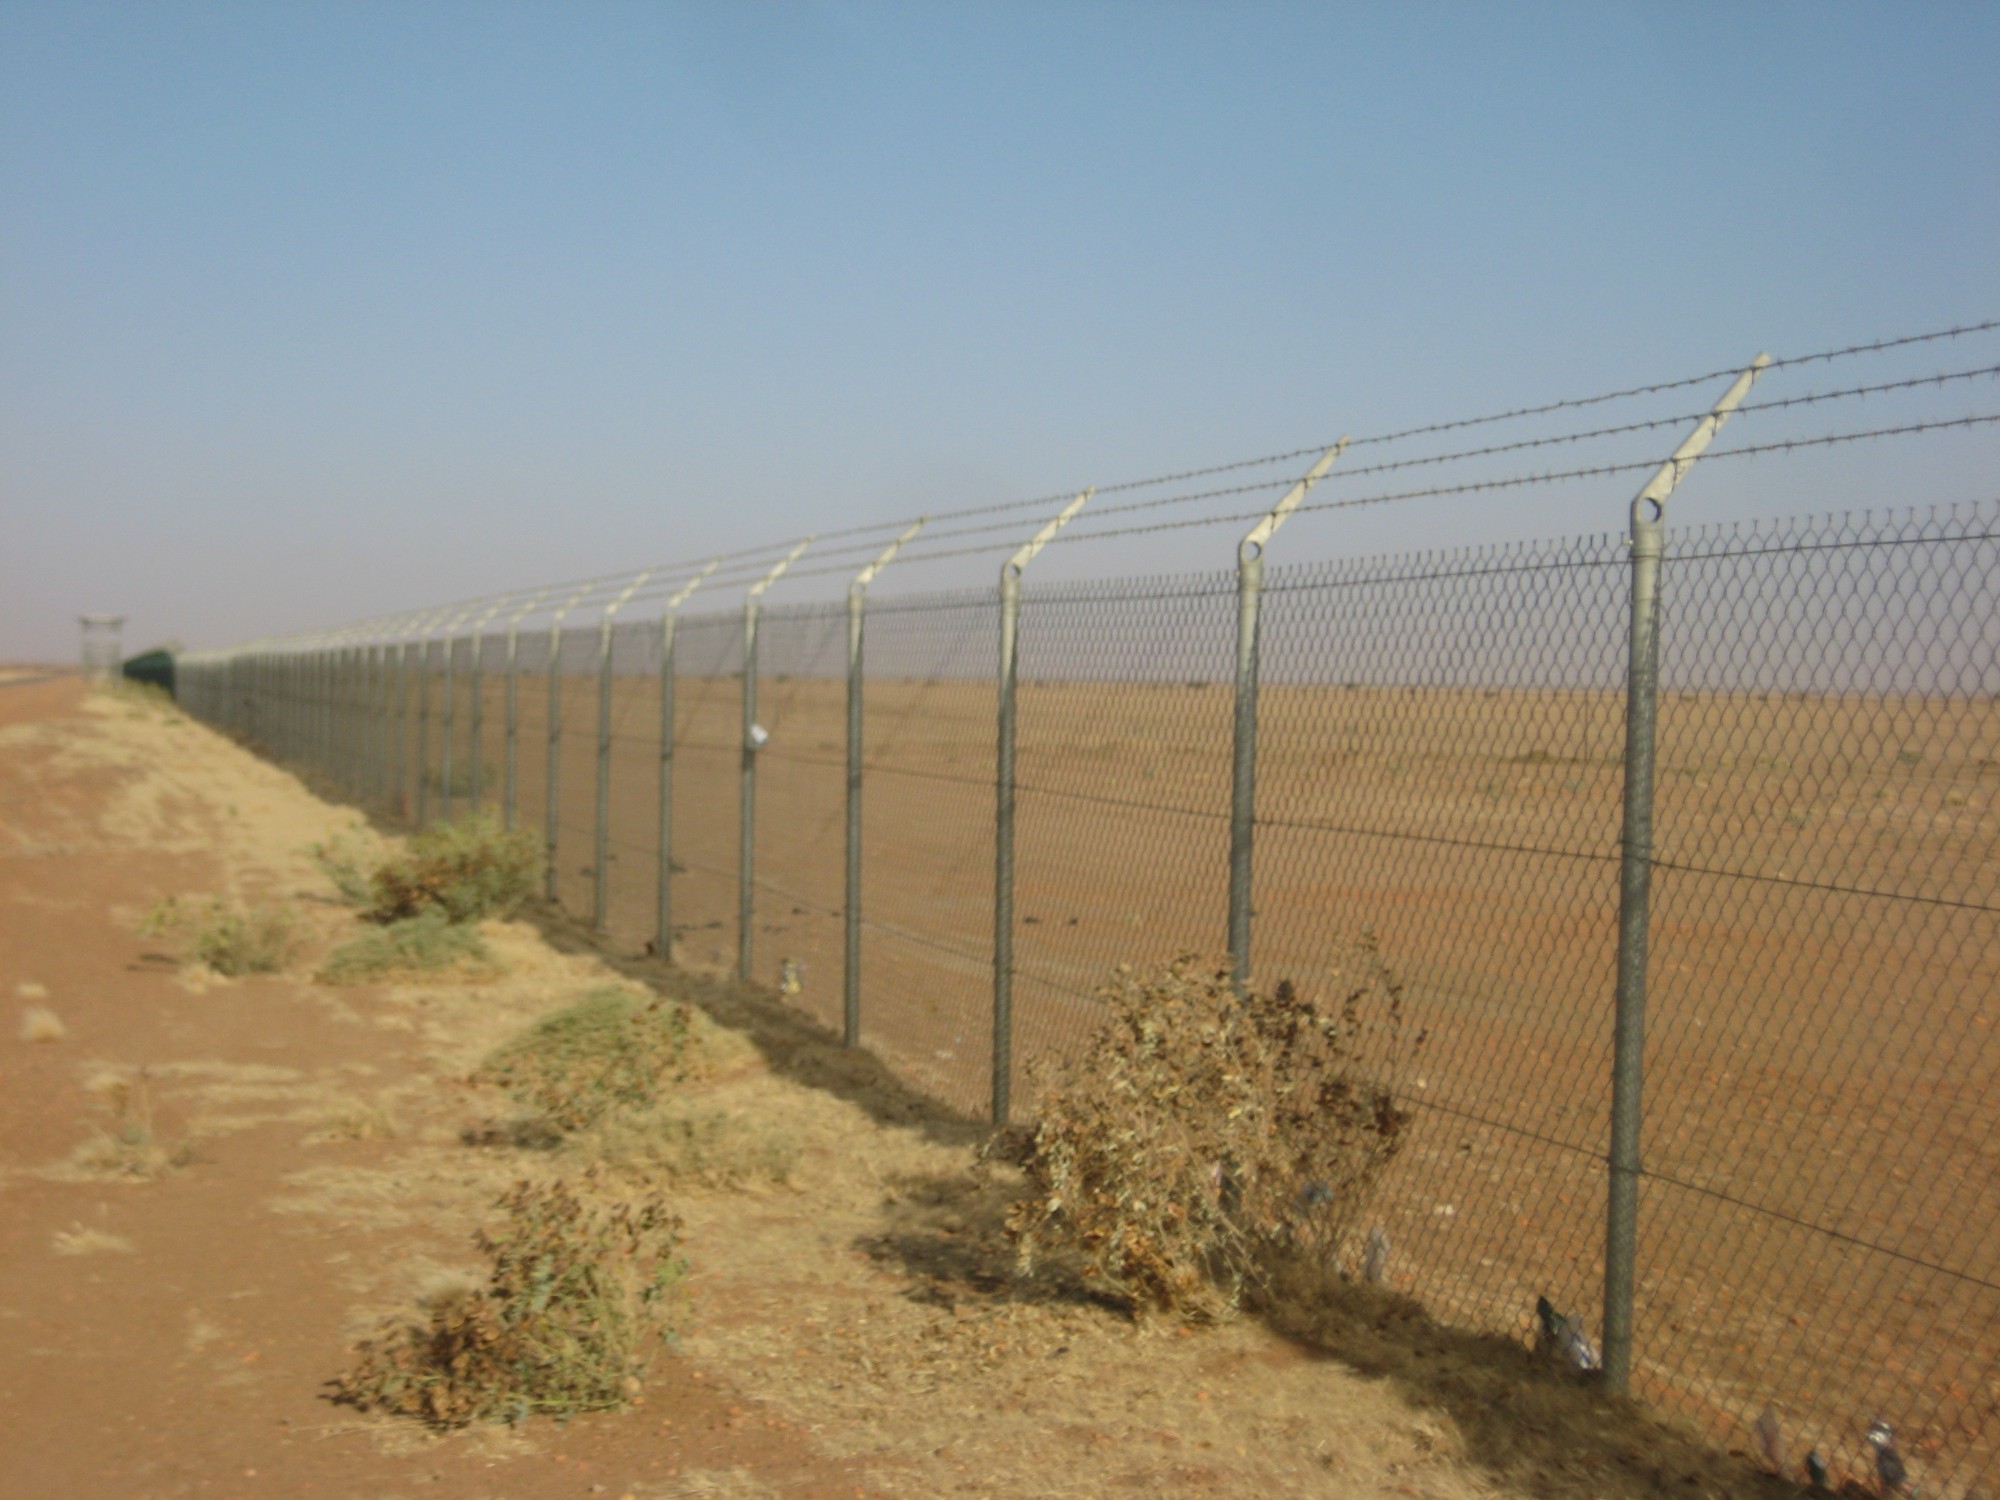 8 Gauge Chain Link Fence: Durable and Flexible Fencing Solution